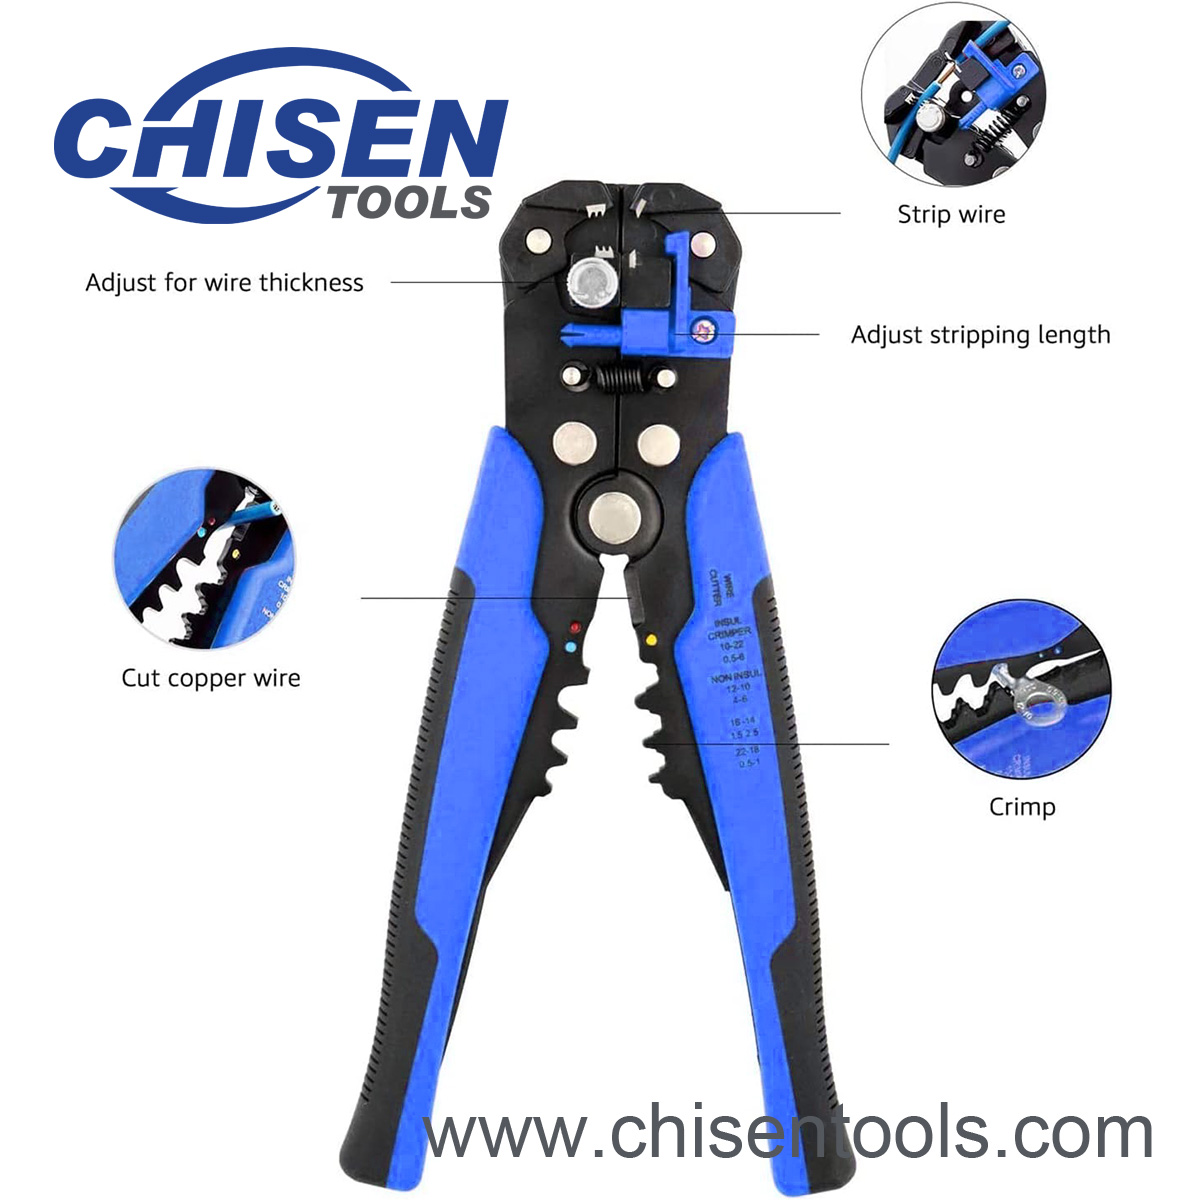 Self-adjusting Wire Stripper's Functions